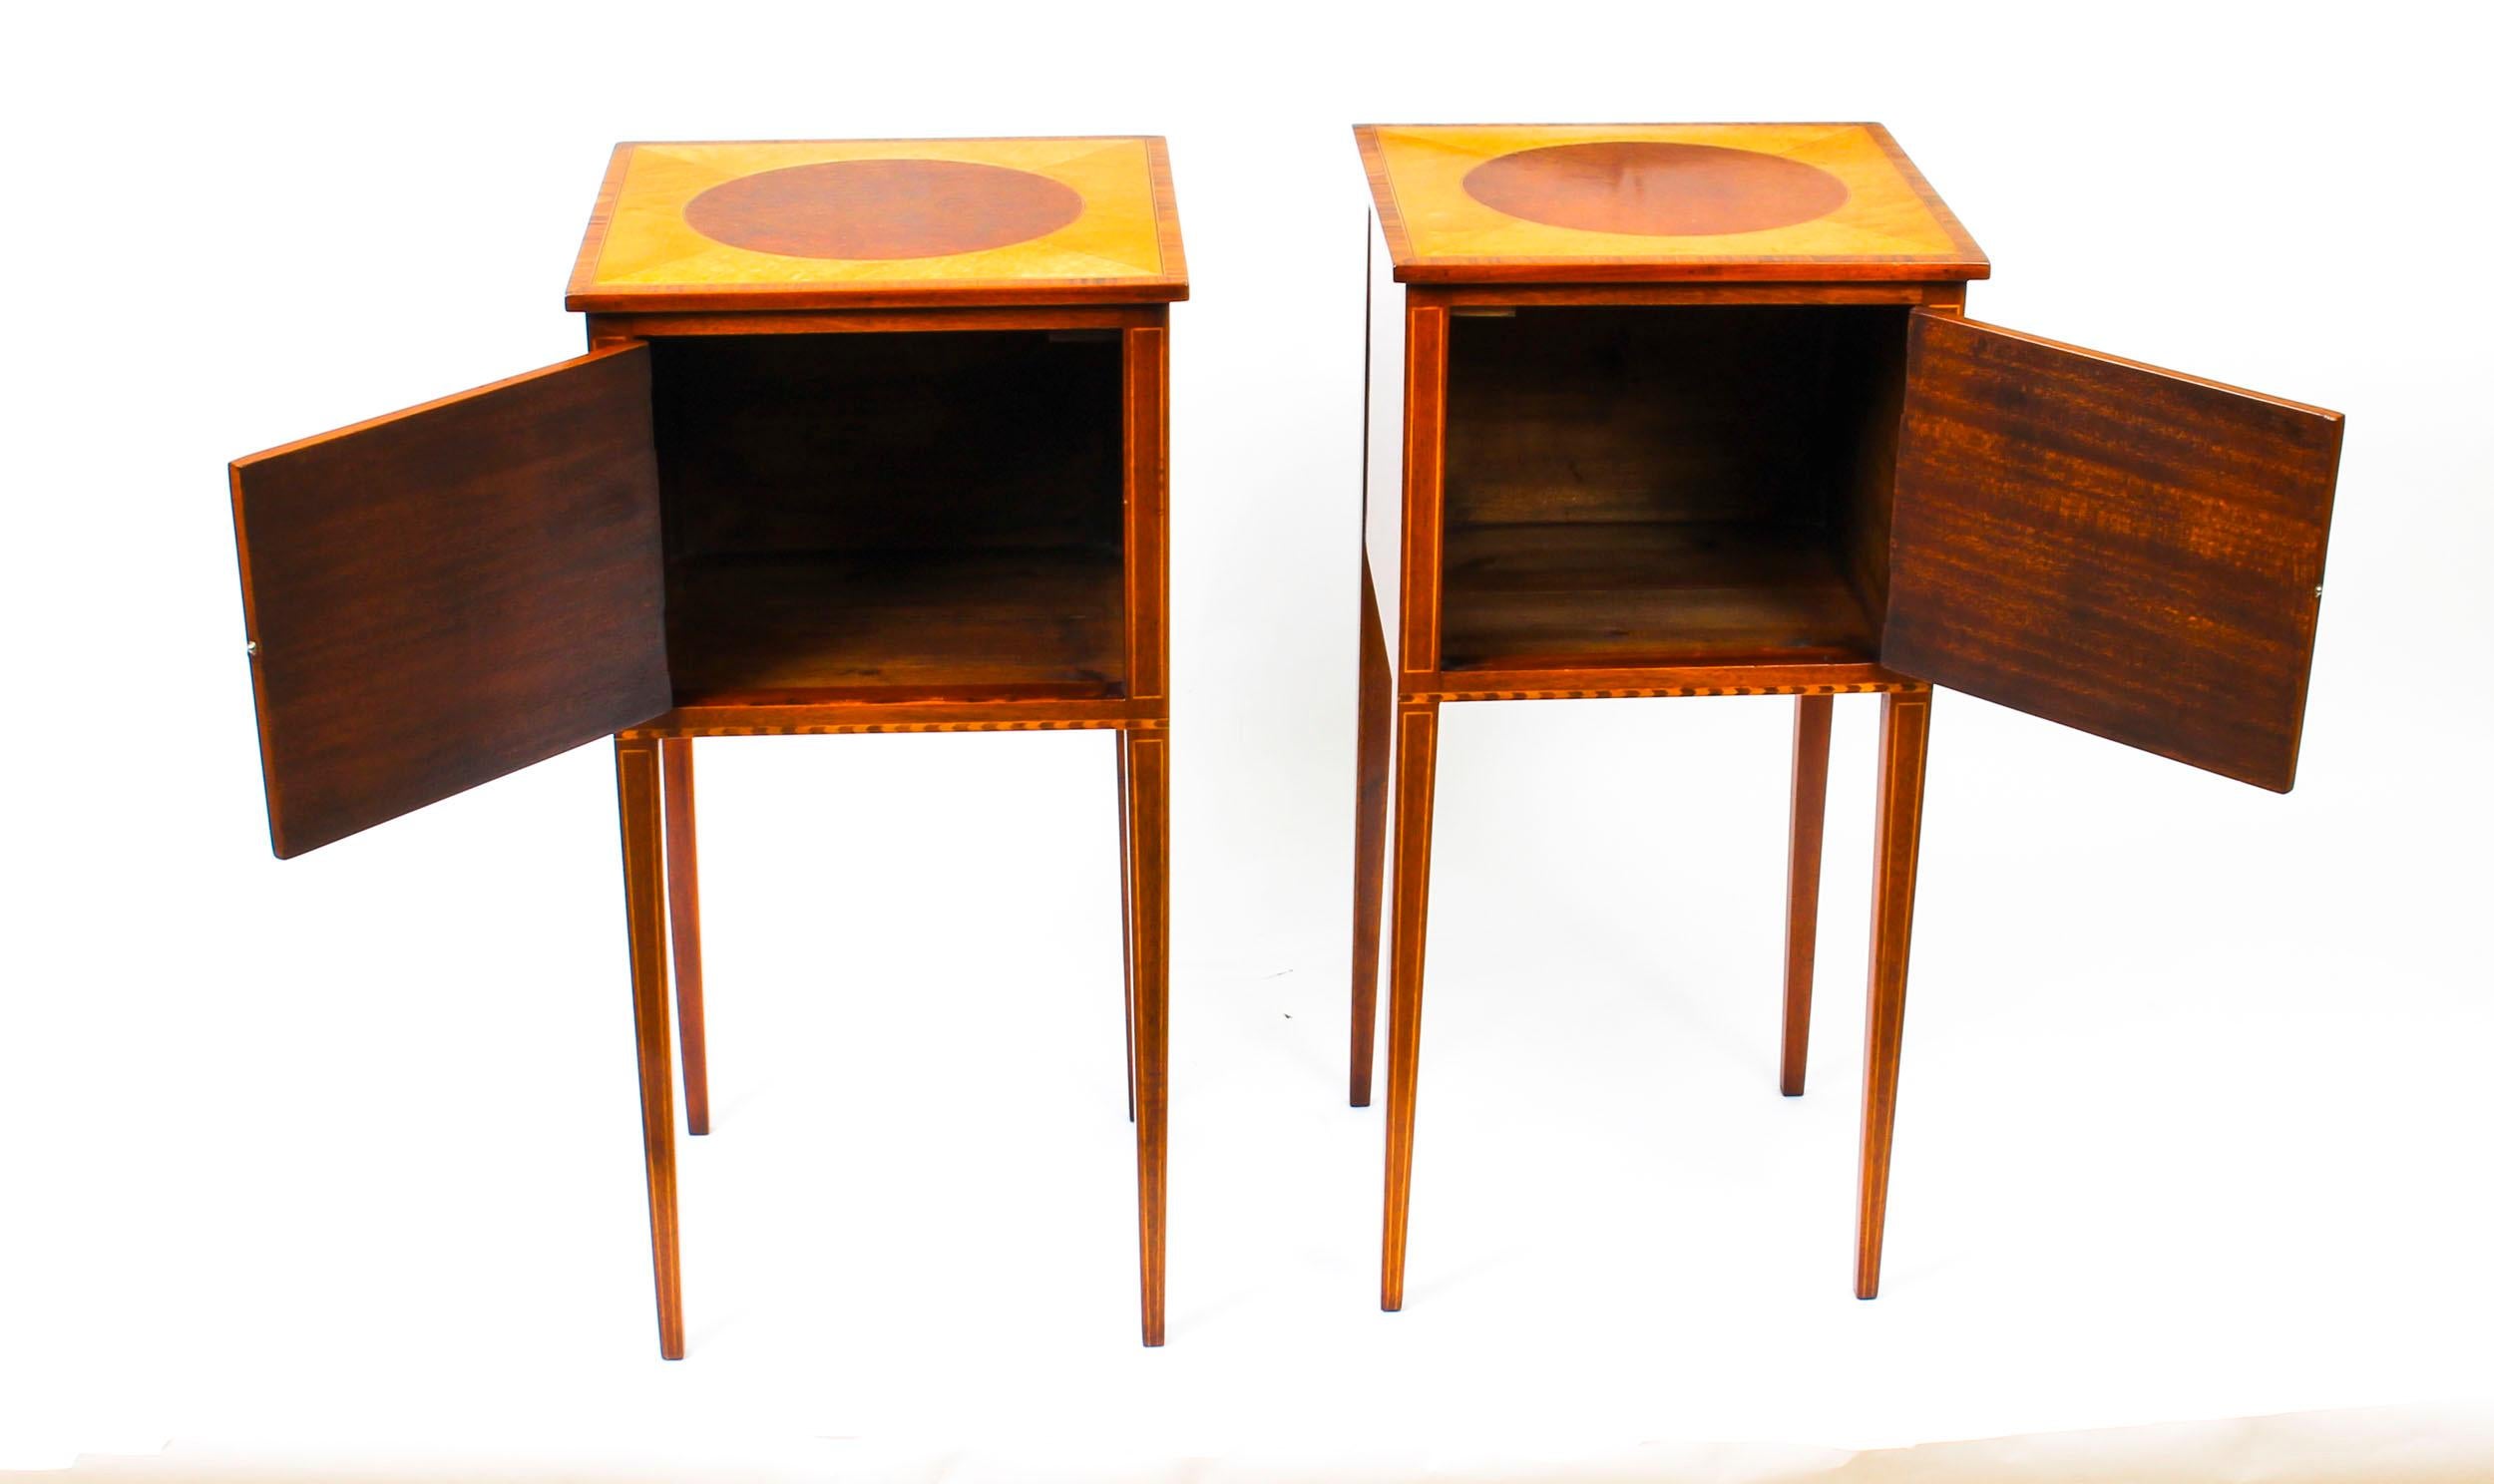 Late 19th Century Antique Pair of Victorian Mahogany and Sycamore Bedside Cabinets, 19th Century